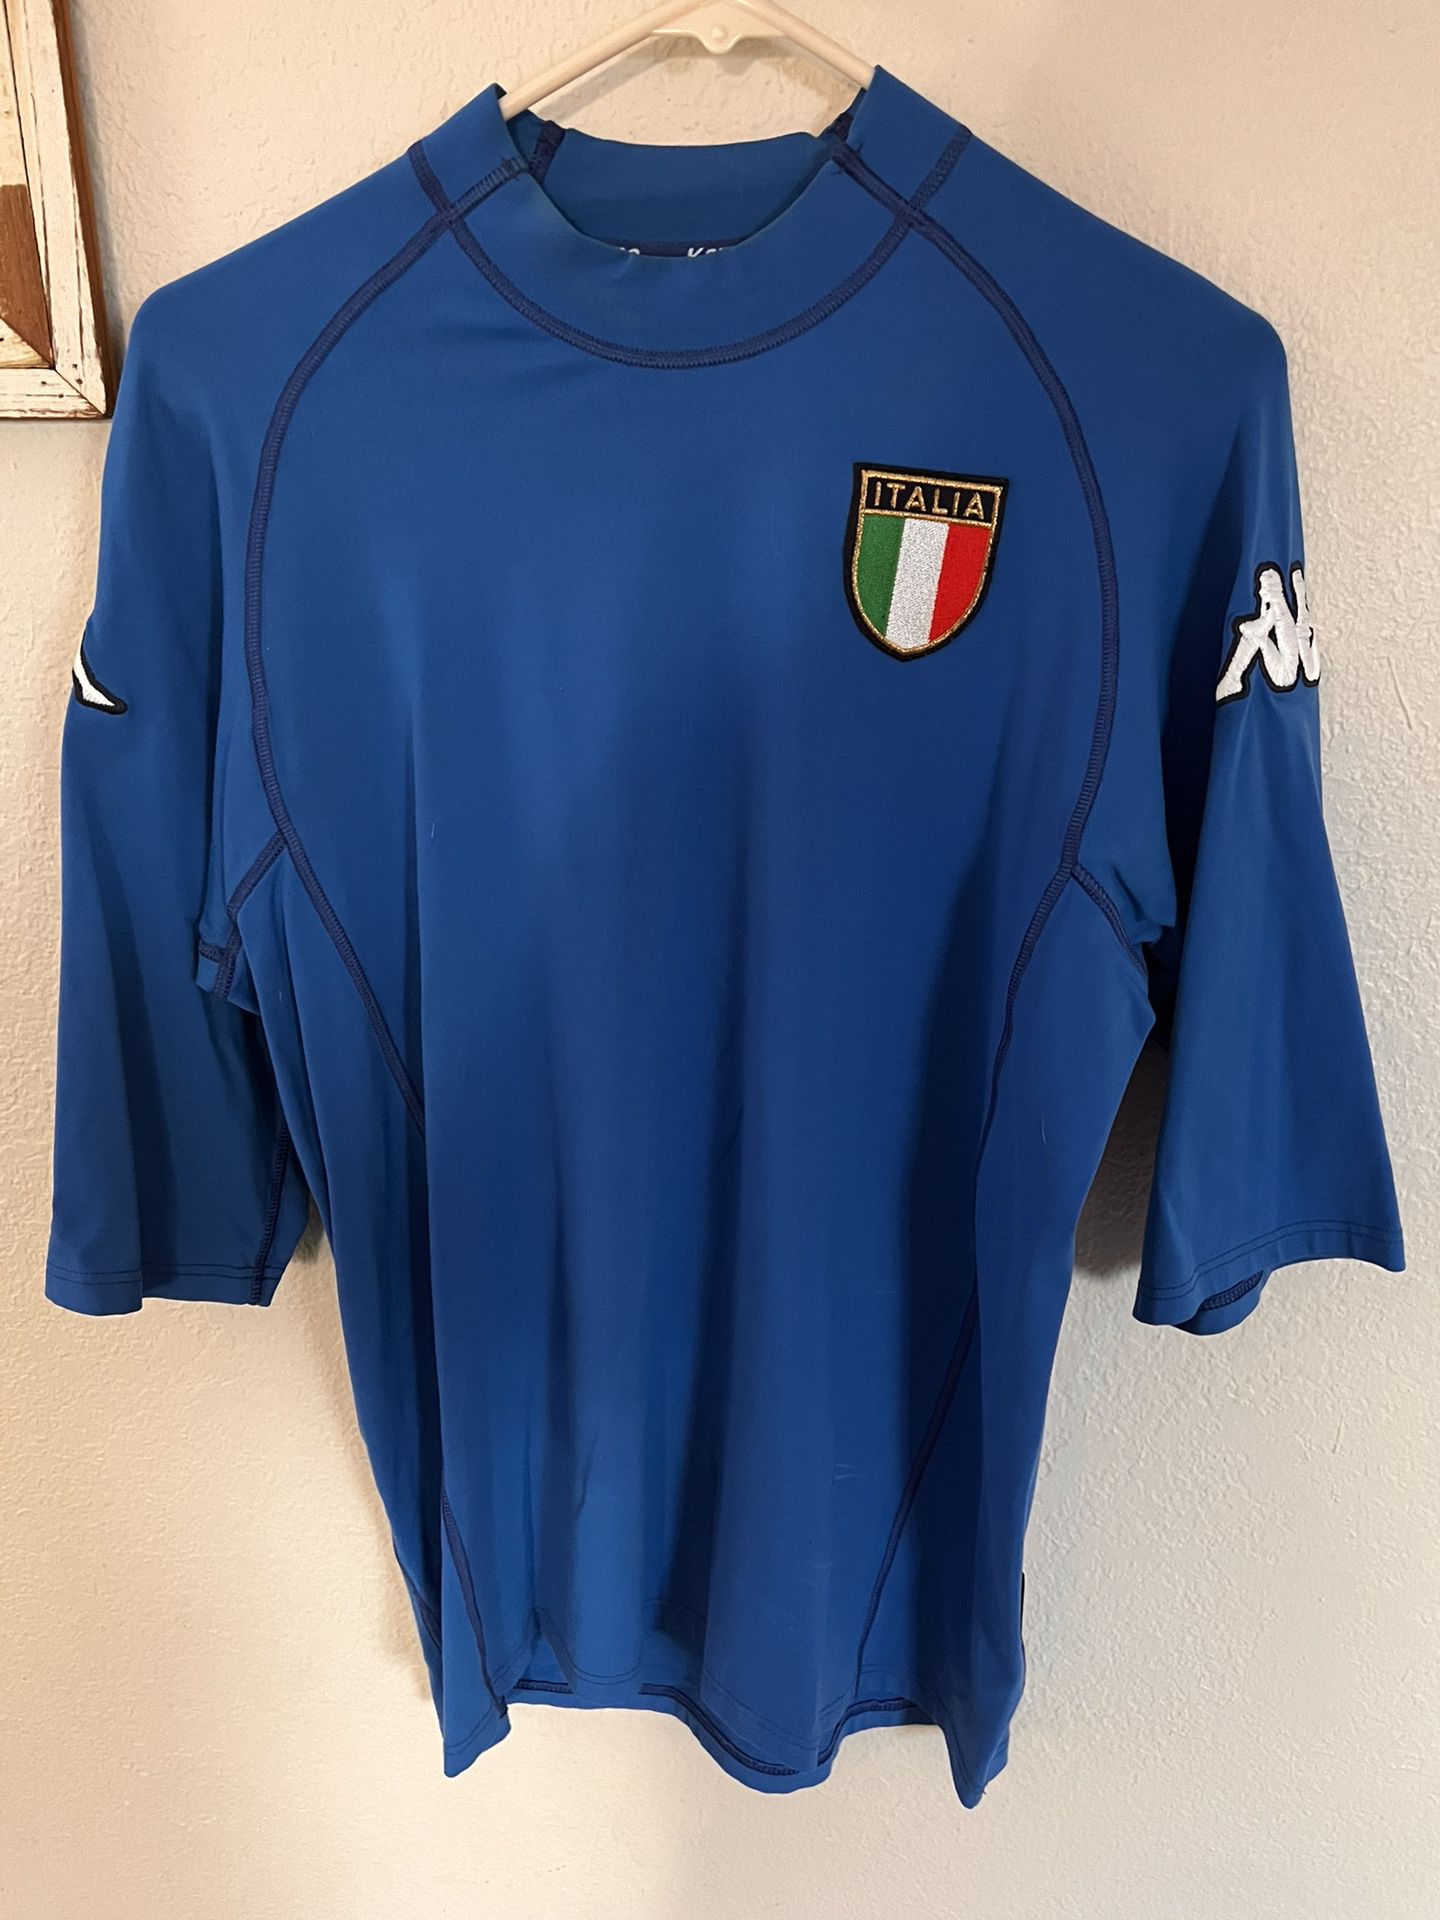 Vibtage 2000/01 Italy Home Football Shirt (XL) Purchased Traveling Abroad